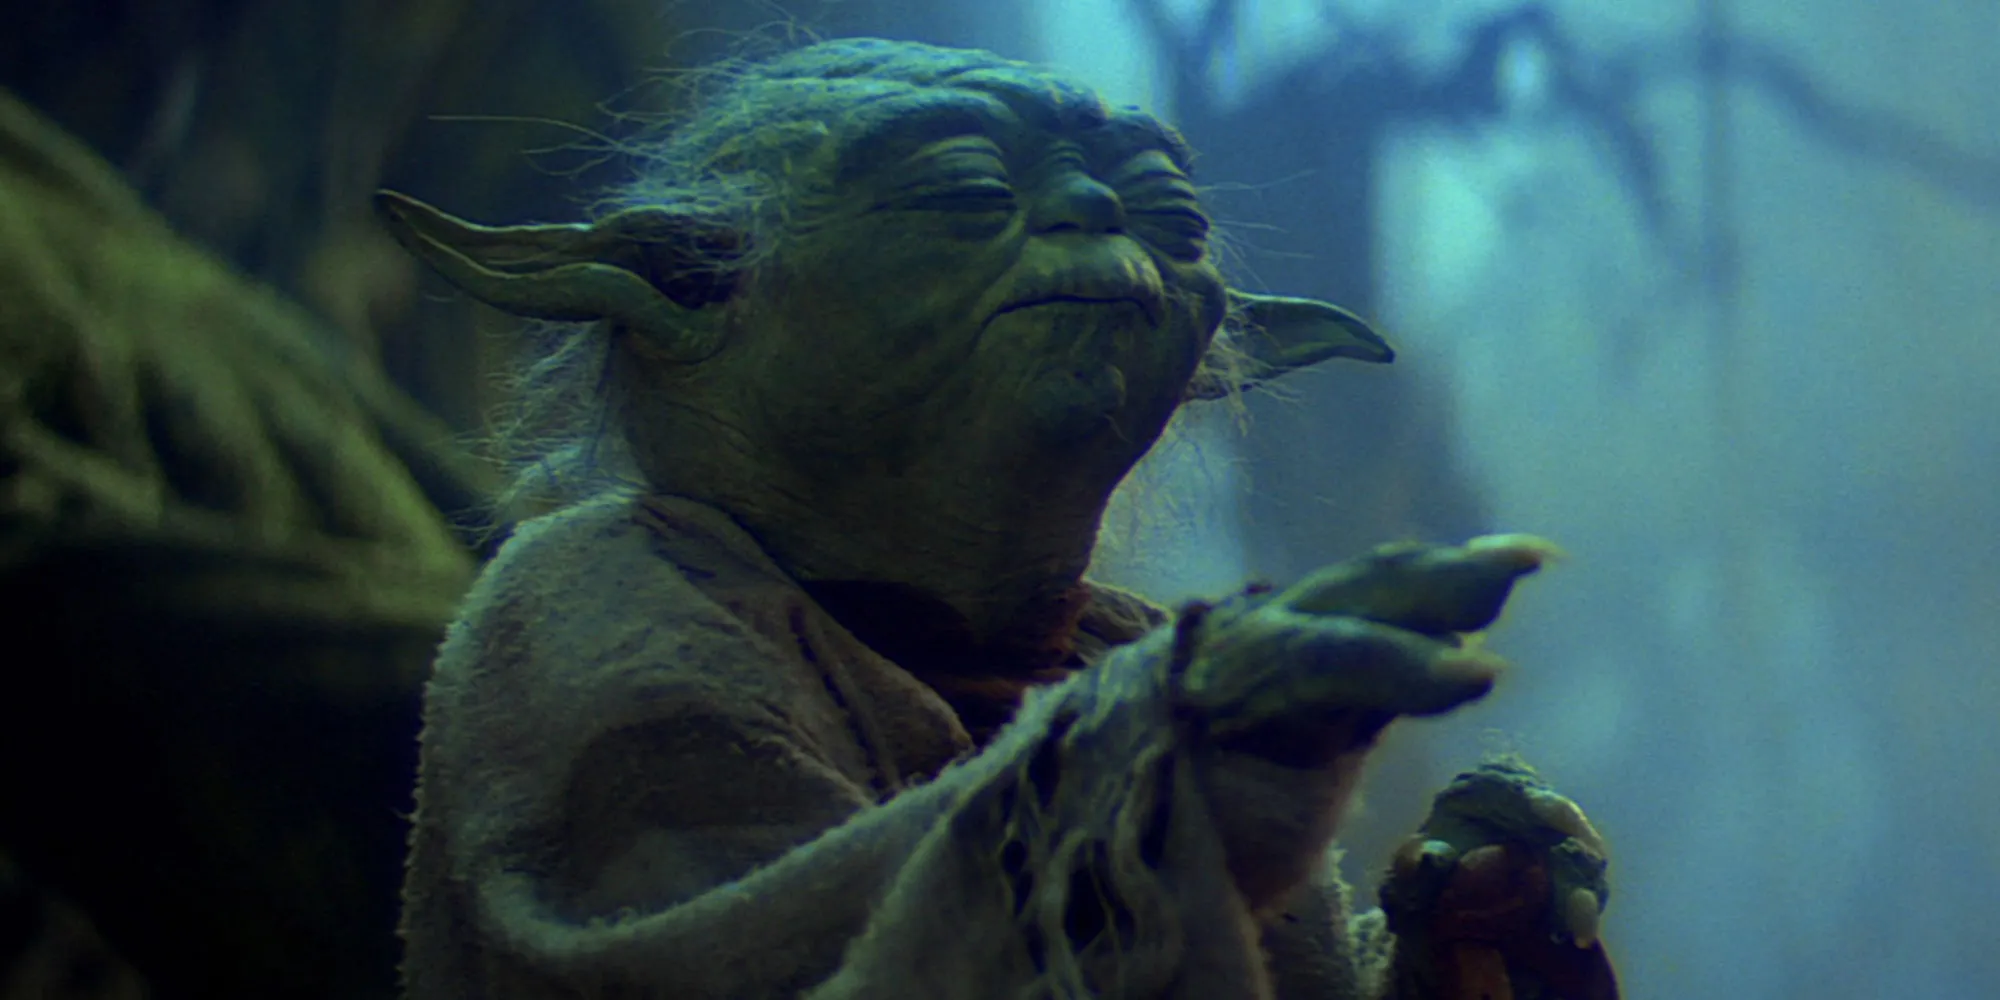 Yoda with his hand raised and eyes closed as he lifts Luke’s X-Wing out of the swamp